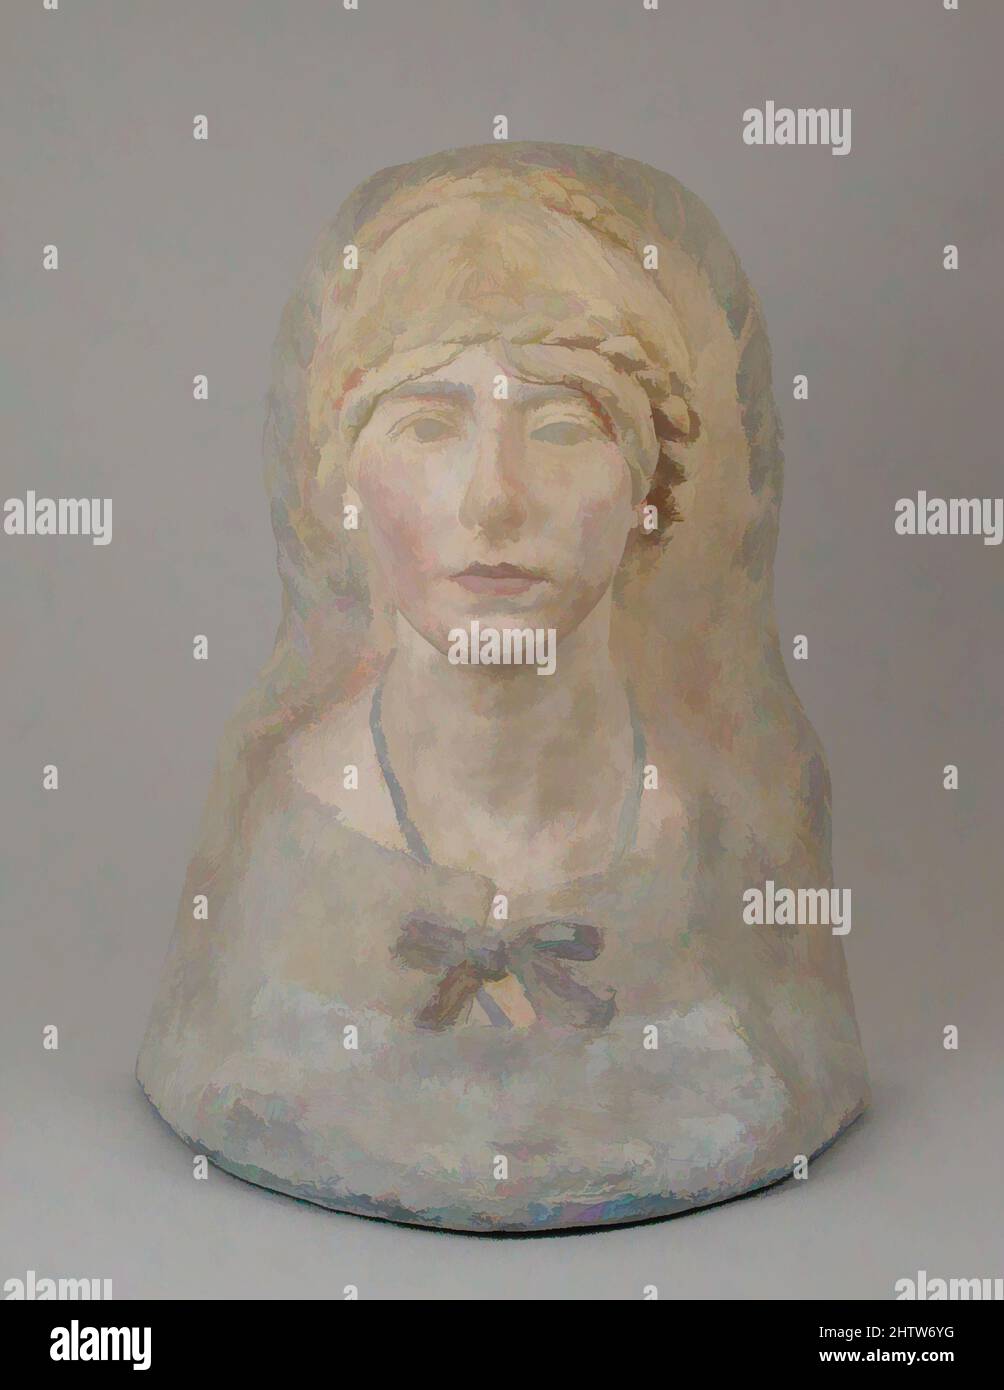 Art inspired by Irene Millet, 1917, French, Paris, Original plaster, tinted and polychromed, 20 1/2 × 15 3/4 × 10 3/4 in. (52.1 × 40 × 27.3 cm), Sculpture, Antoine-Émile Bourdelle (French, Montauban 1861–1929 Vésinet), Greco-Egyptian funerary portraiture provided the stylistic, Classic works modernized by Artotop with a splash of modernity. Shapes, color and value, eye-catching visual impact on art. Emotions through freedom of artworks in a contemporary way. A timeless message pursuing a wildly creative new direction. Artists turning to the digital medium and creating the Artotop NFT Stock Photo